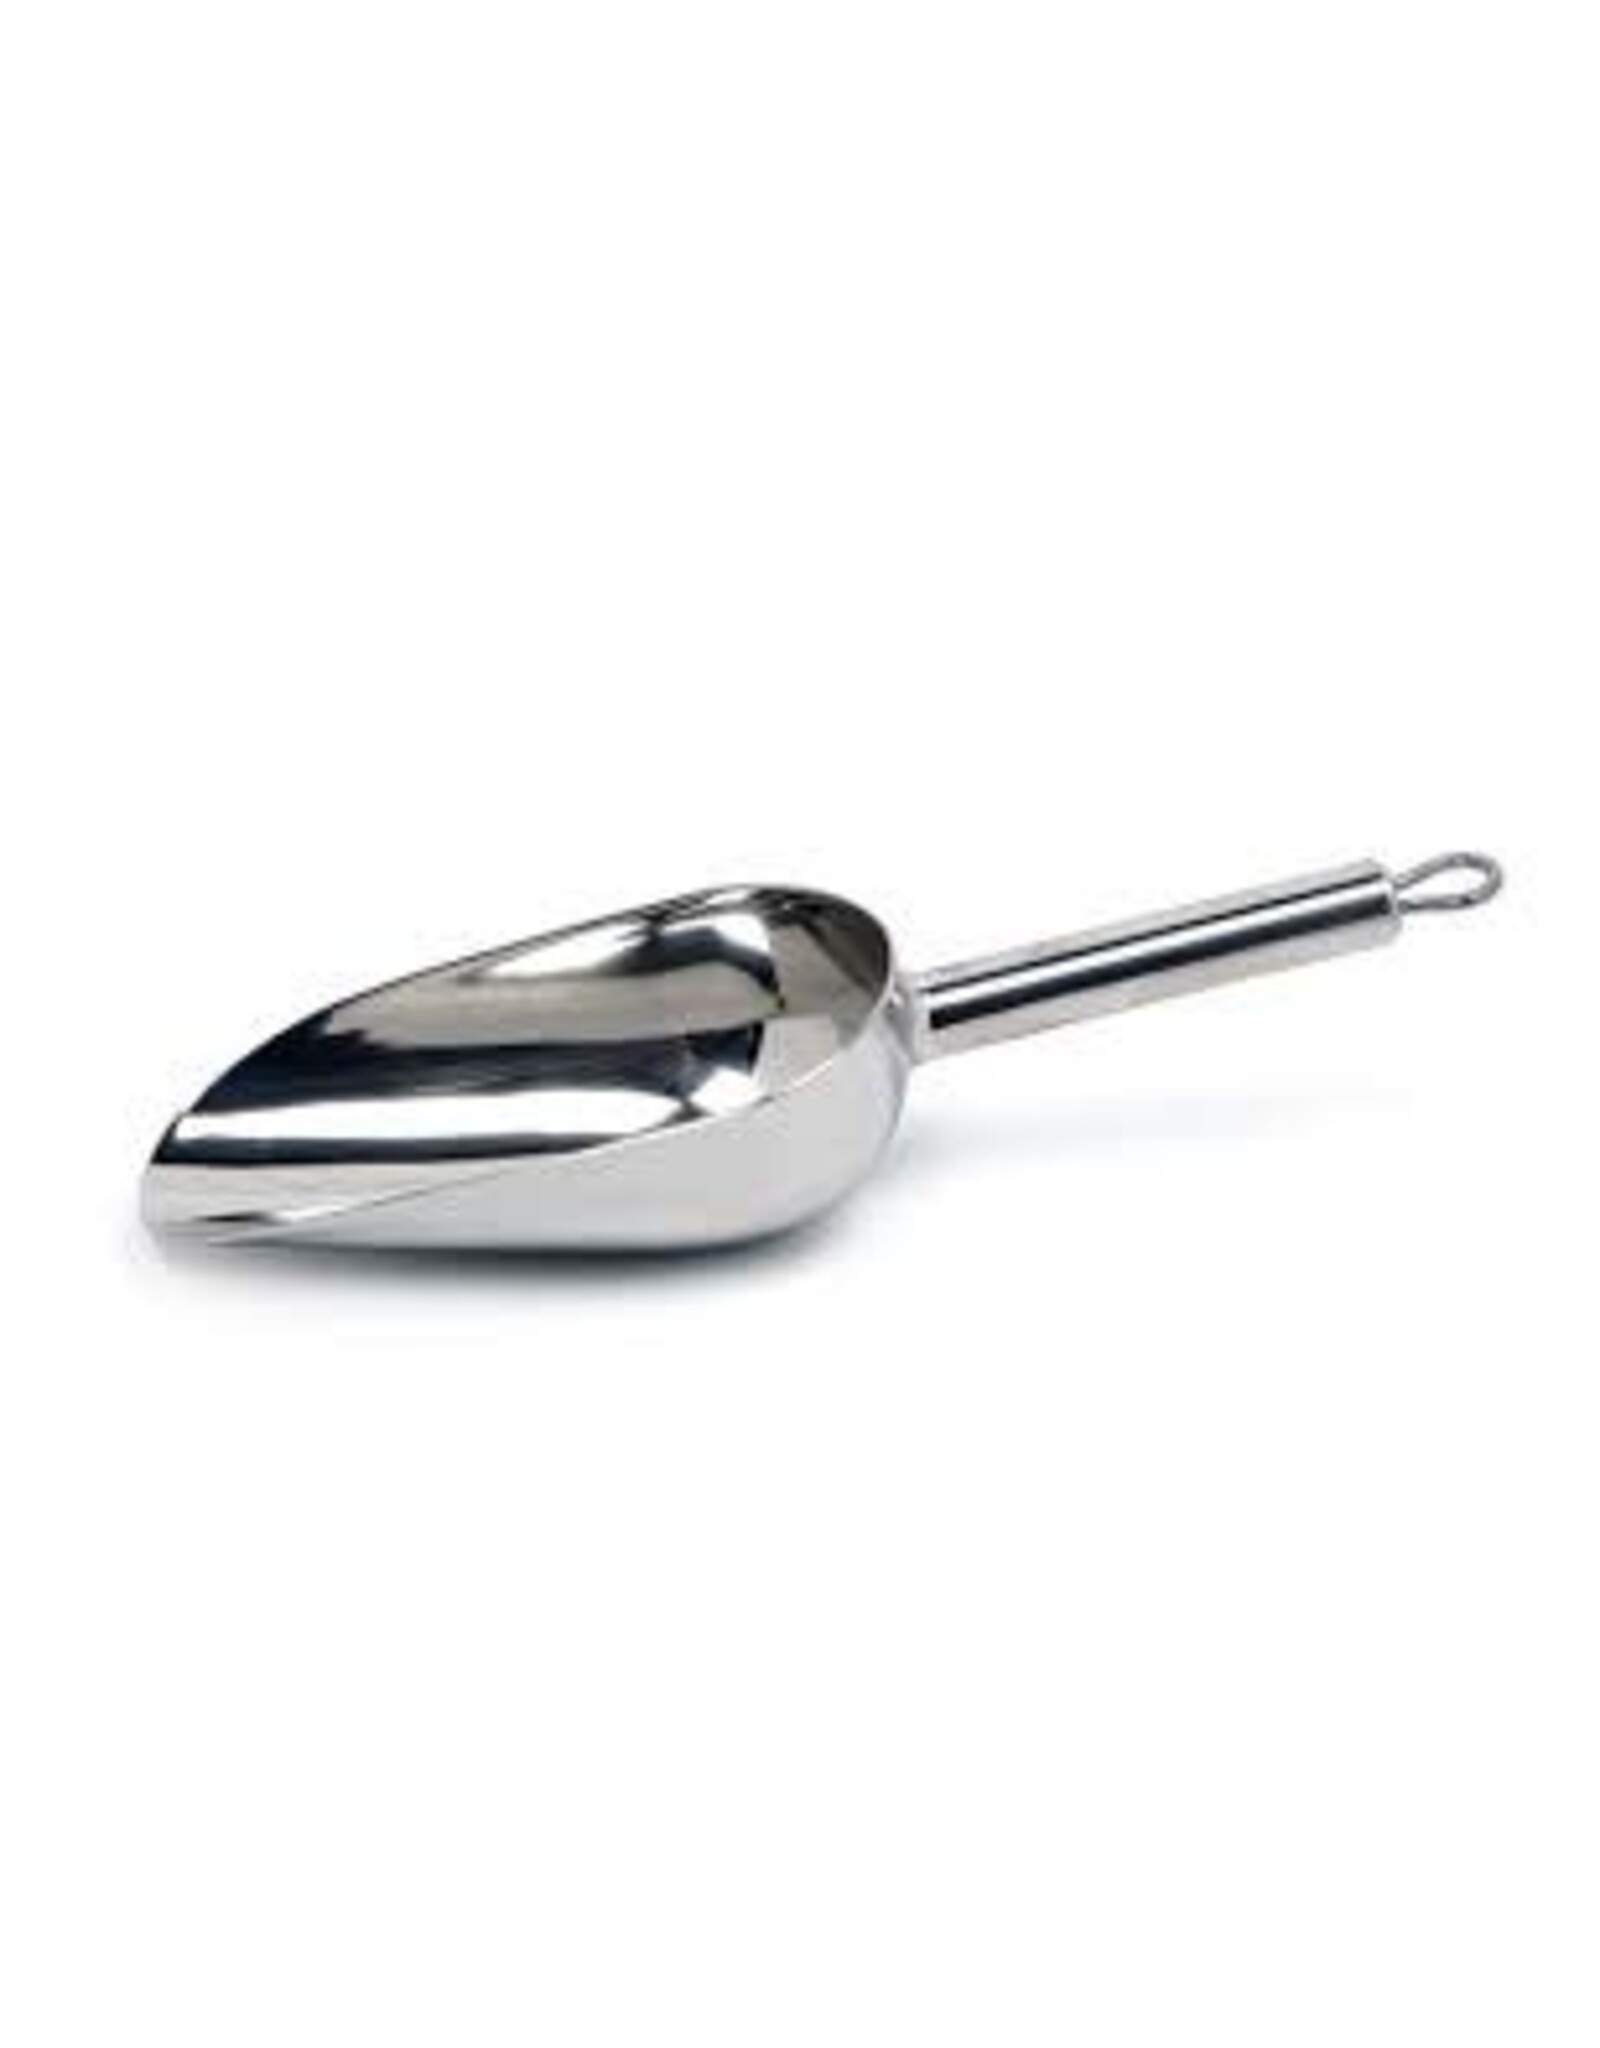 Large Stainless Steel Scoop 1 Cup